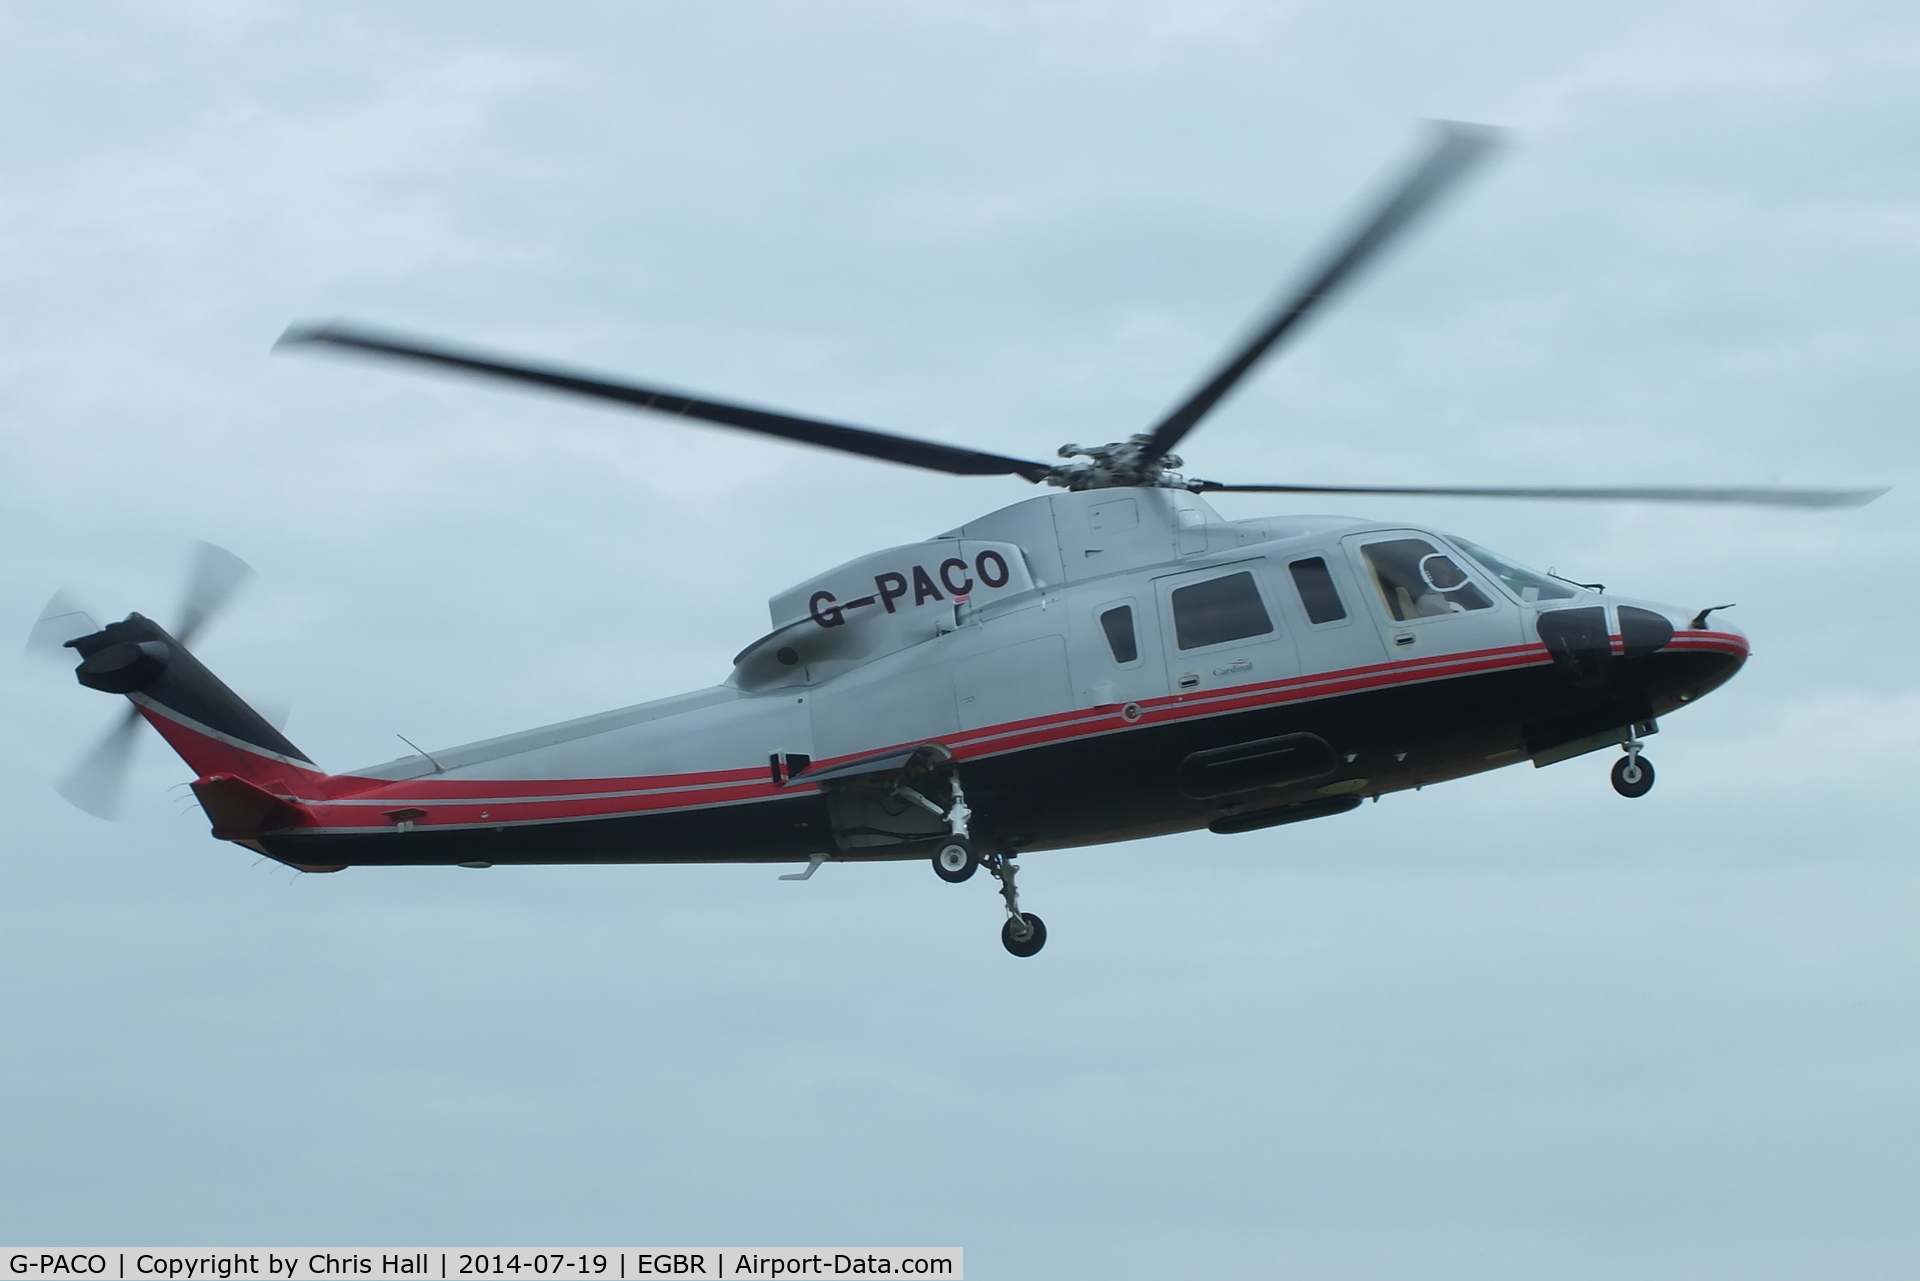 G-PACO, 2009 Sikorsky S-76C C/N 760782, Cardinal Helicopter Services (IOM) Ltd